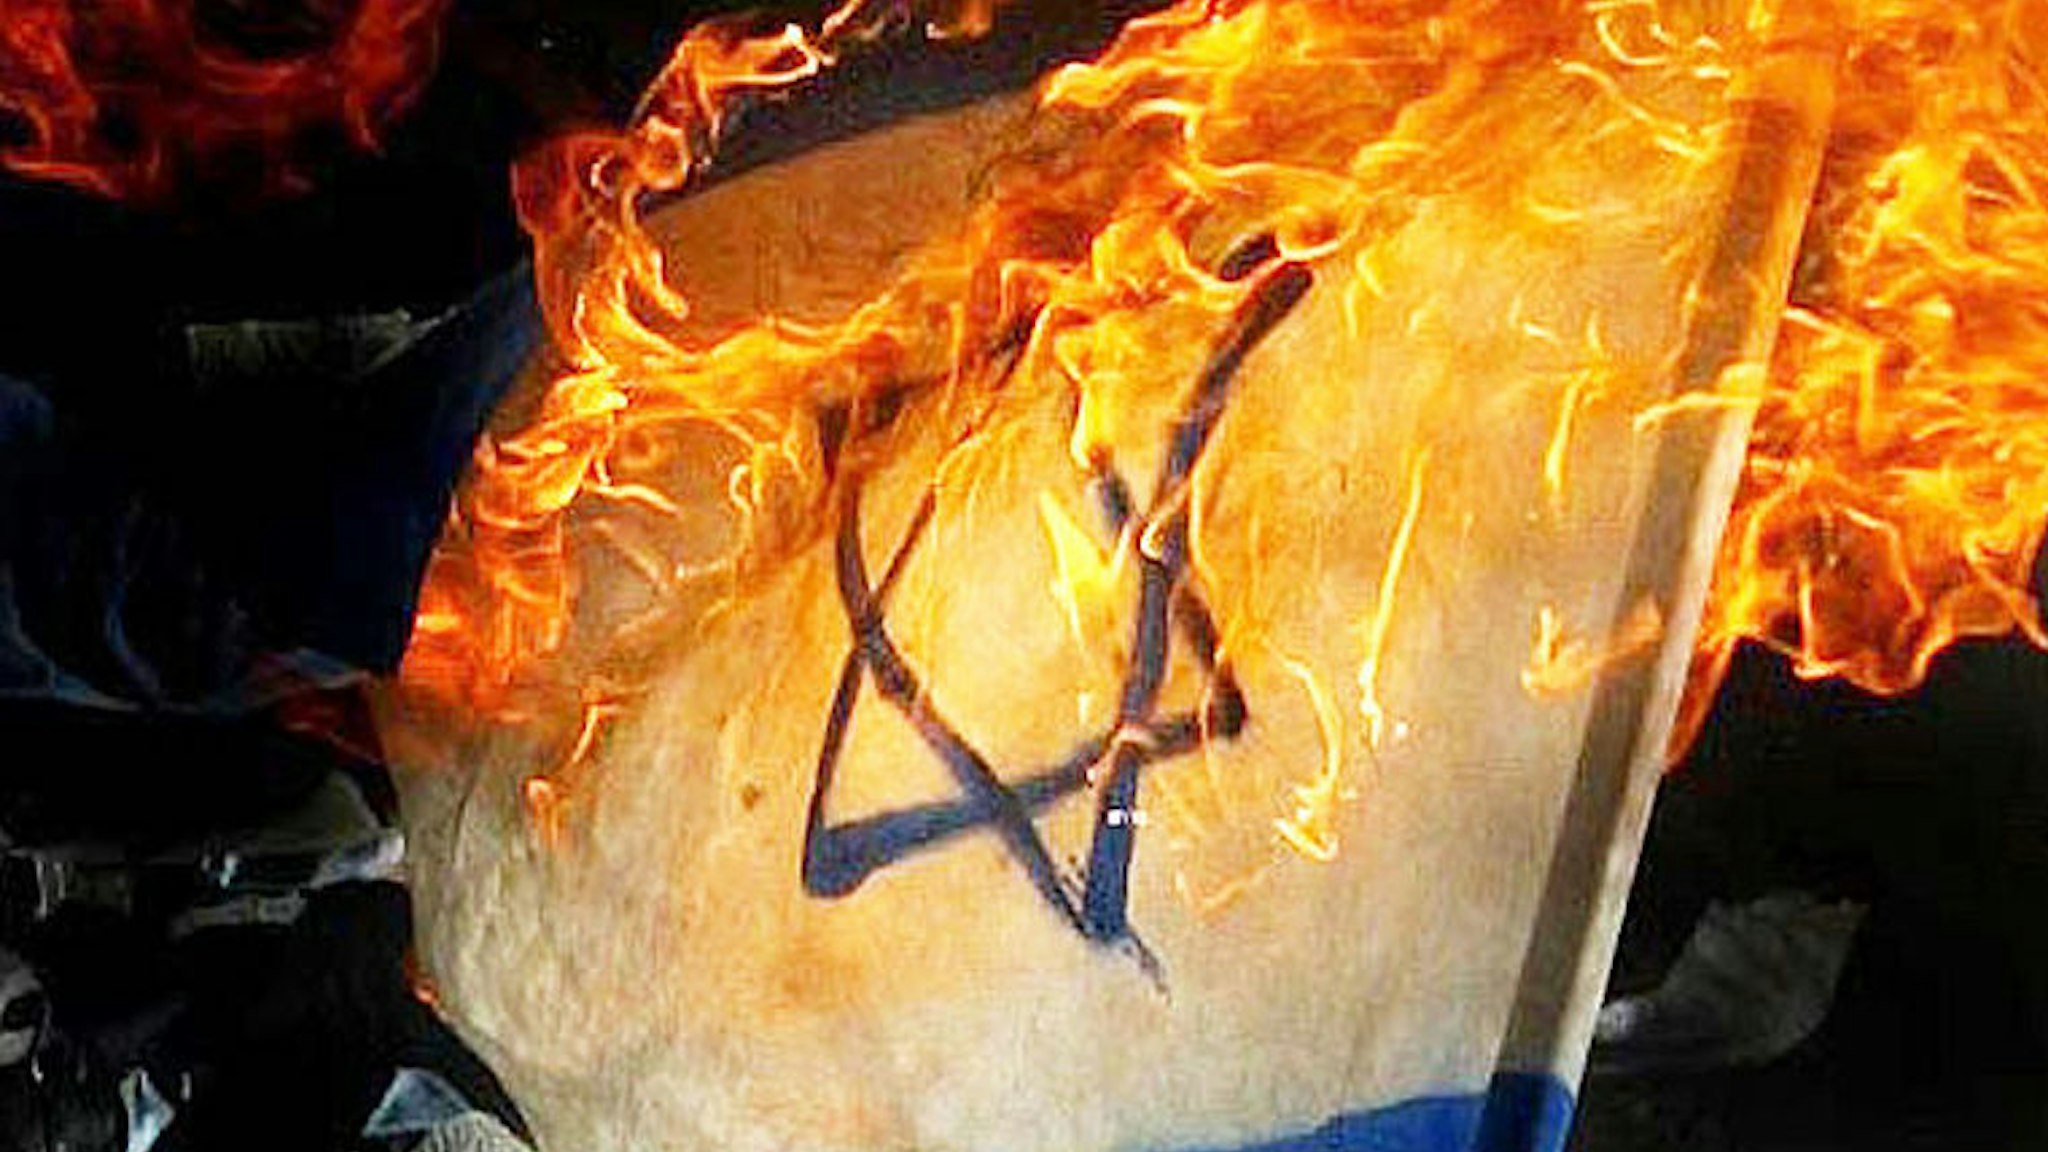 The Israeli flag is burned by Palestinian militants during an anti-Israel rally on April 17, 2004, in Gaza, Gaza Strip.